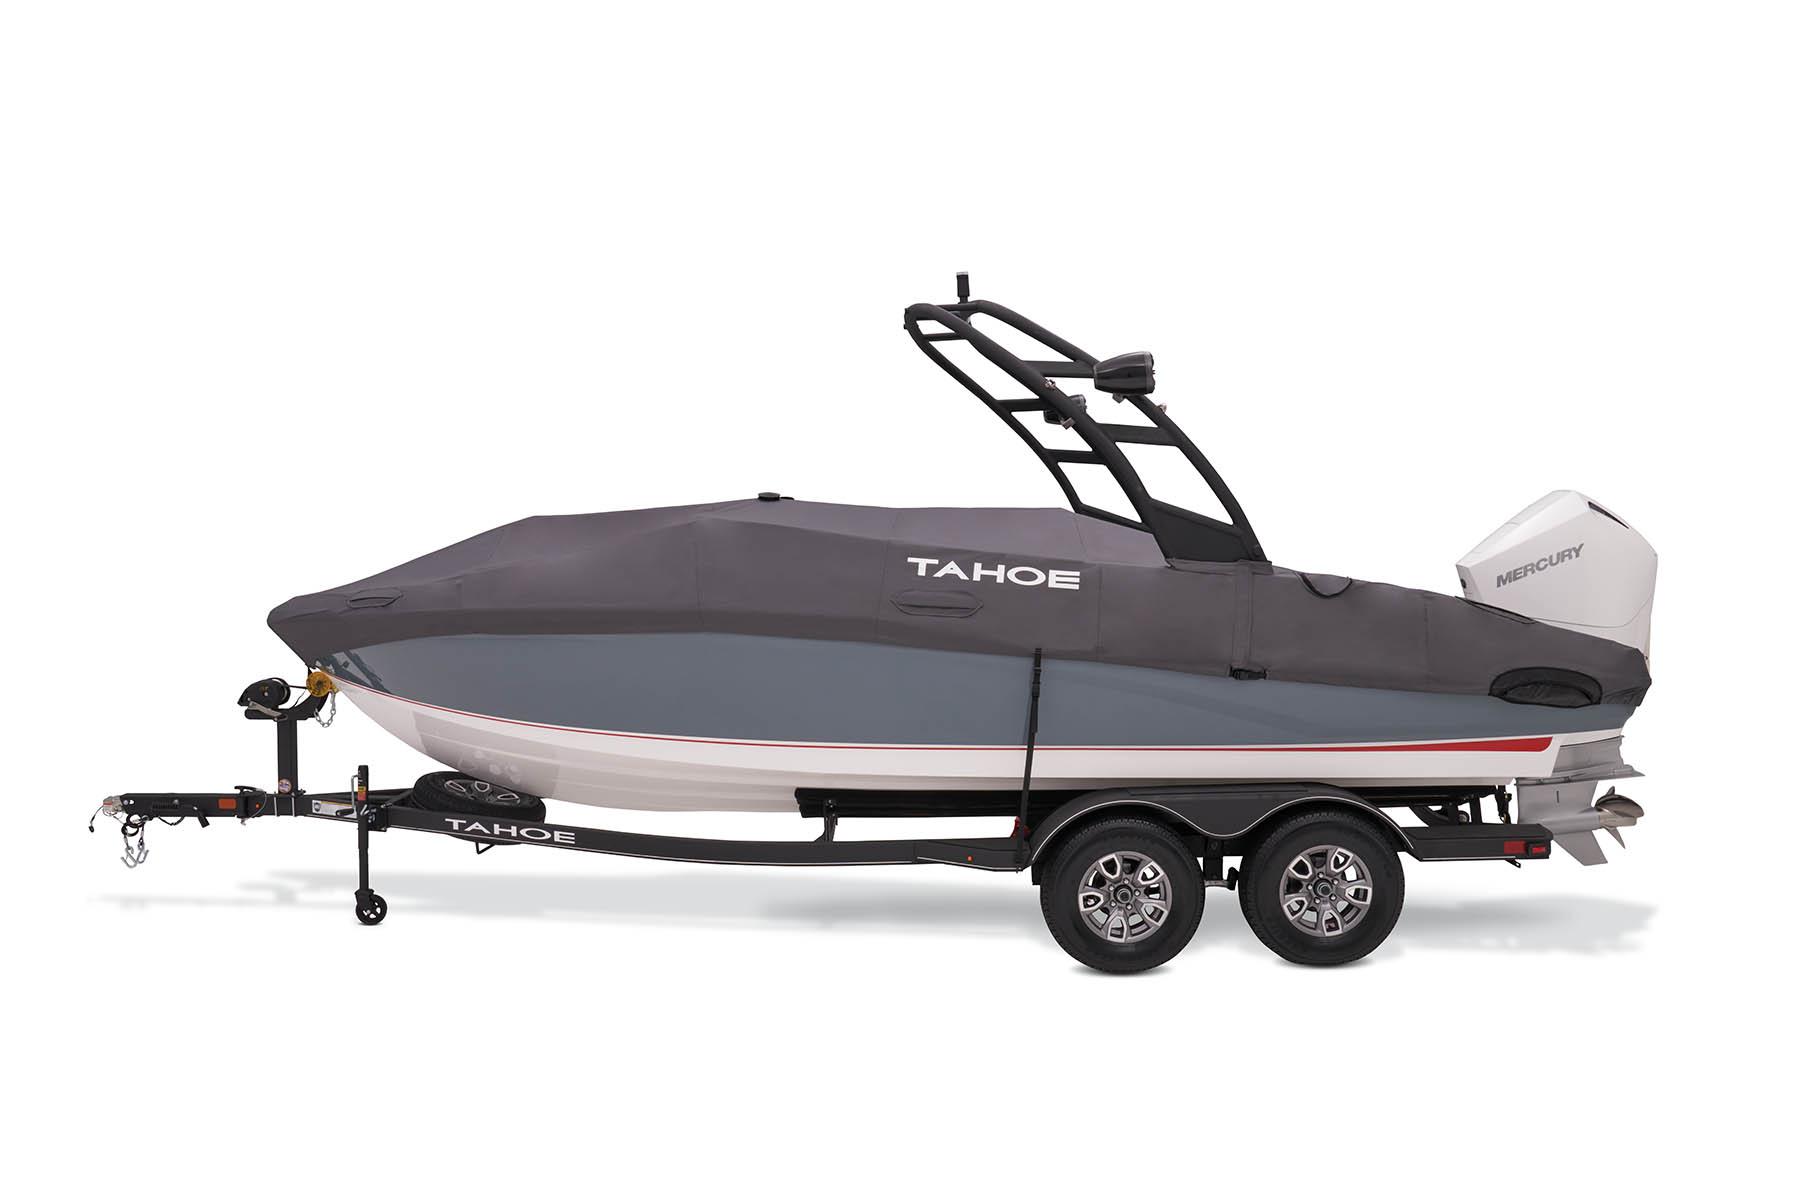 Manufacturer Provided Image: Tahoe 210 S Limited